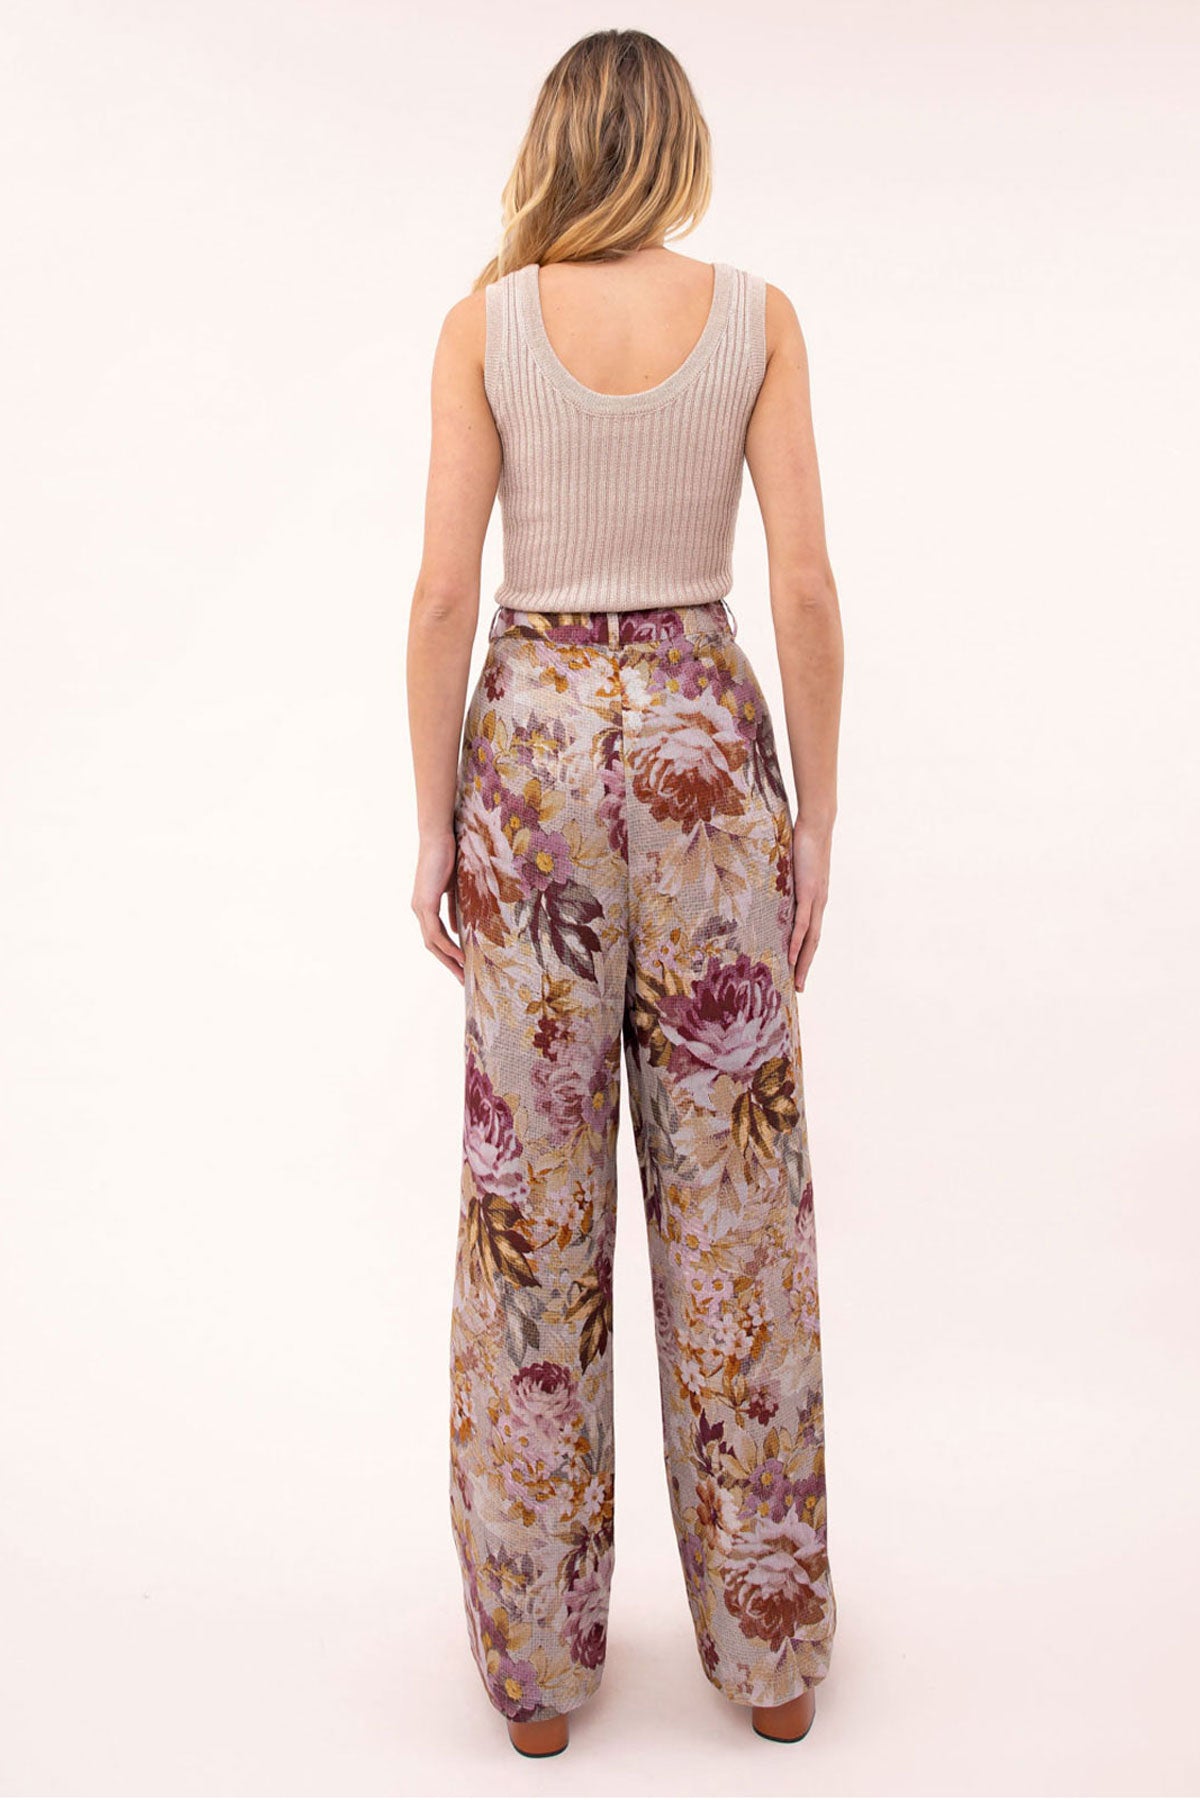 Black Tropical Cuffed Hem Soft Trousers  Womens Trousers  Select Fashion  Online